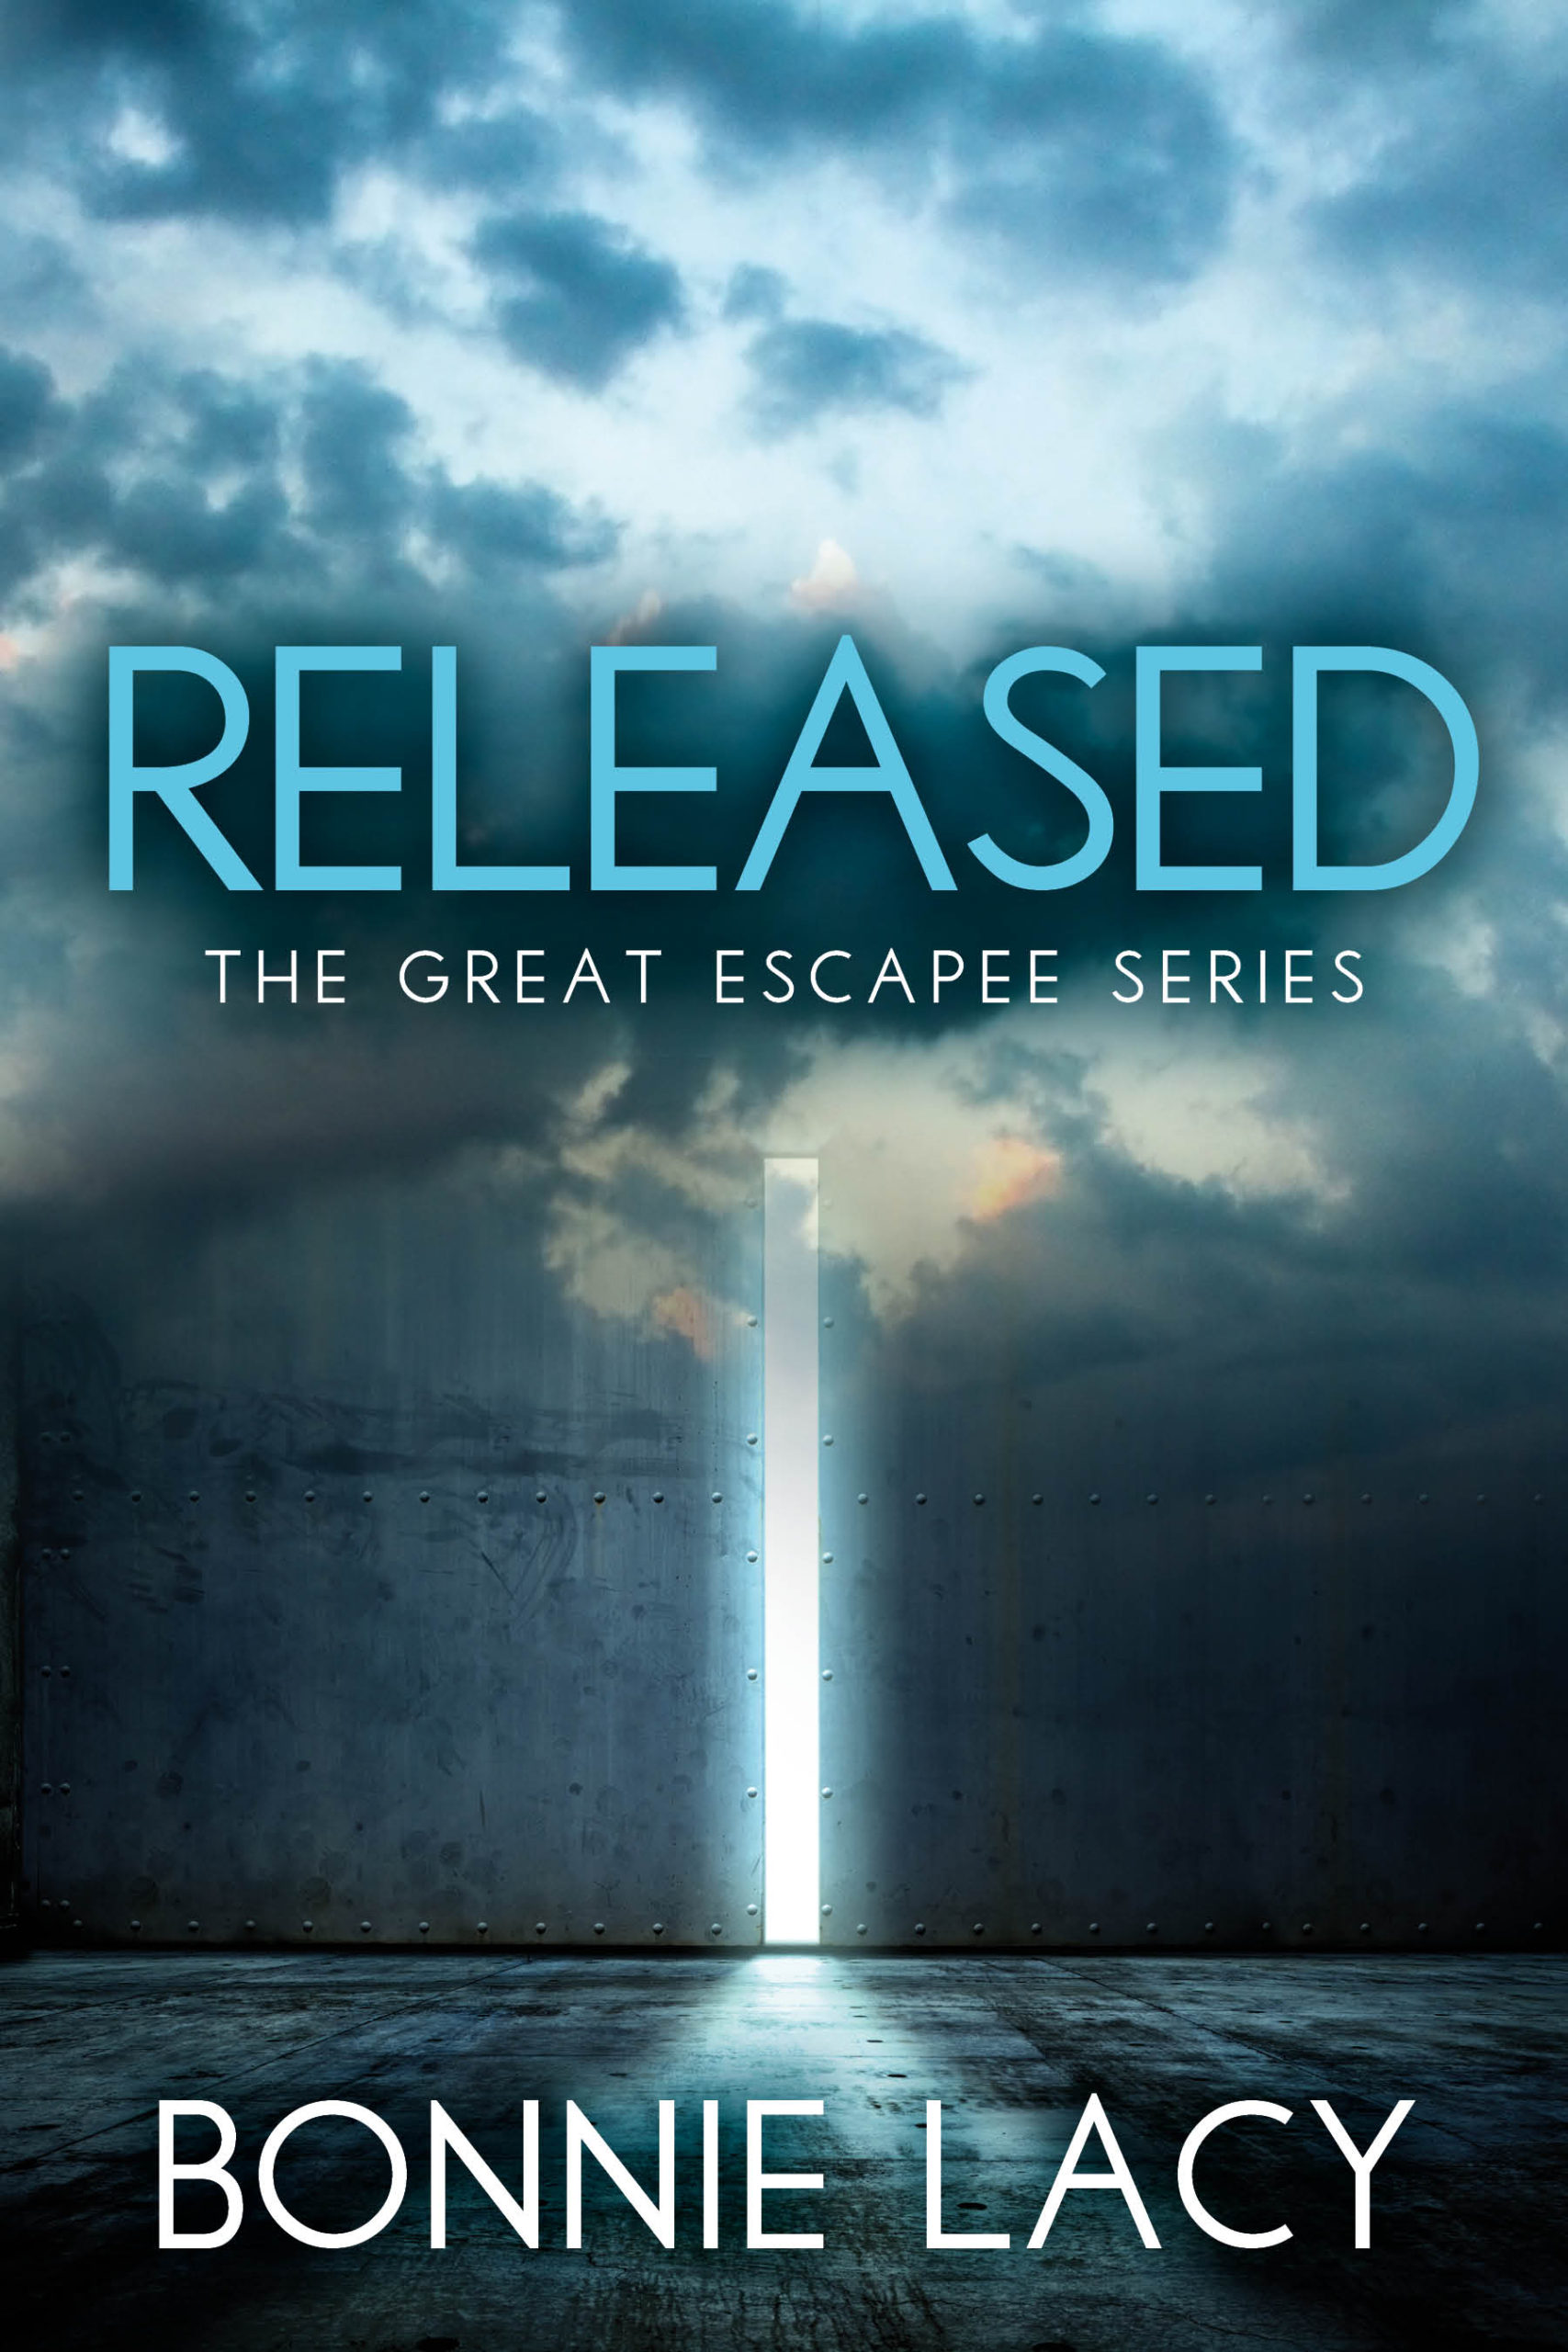 Released by Bonnie Lacy